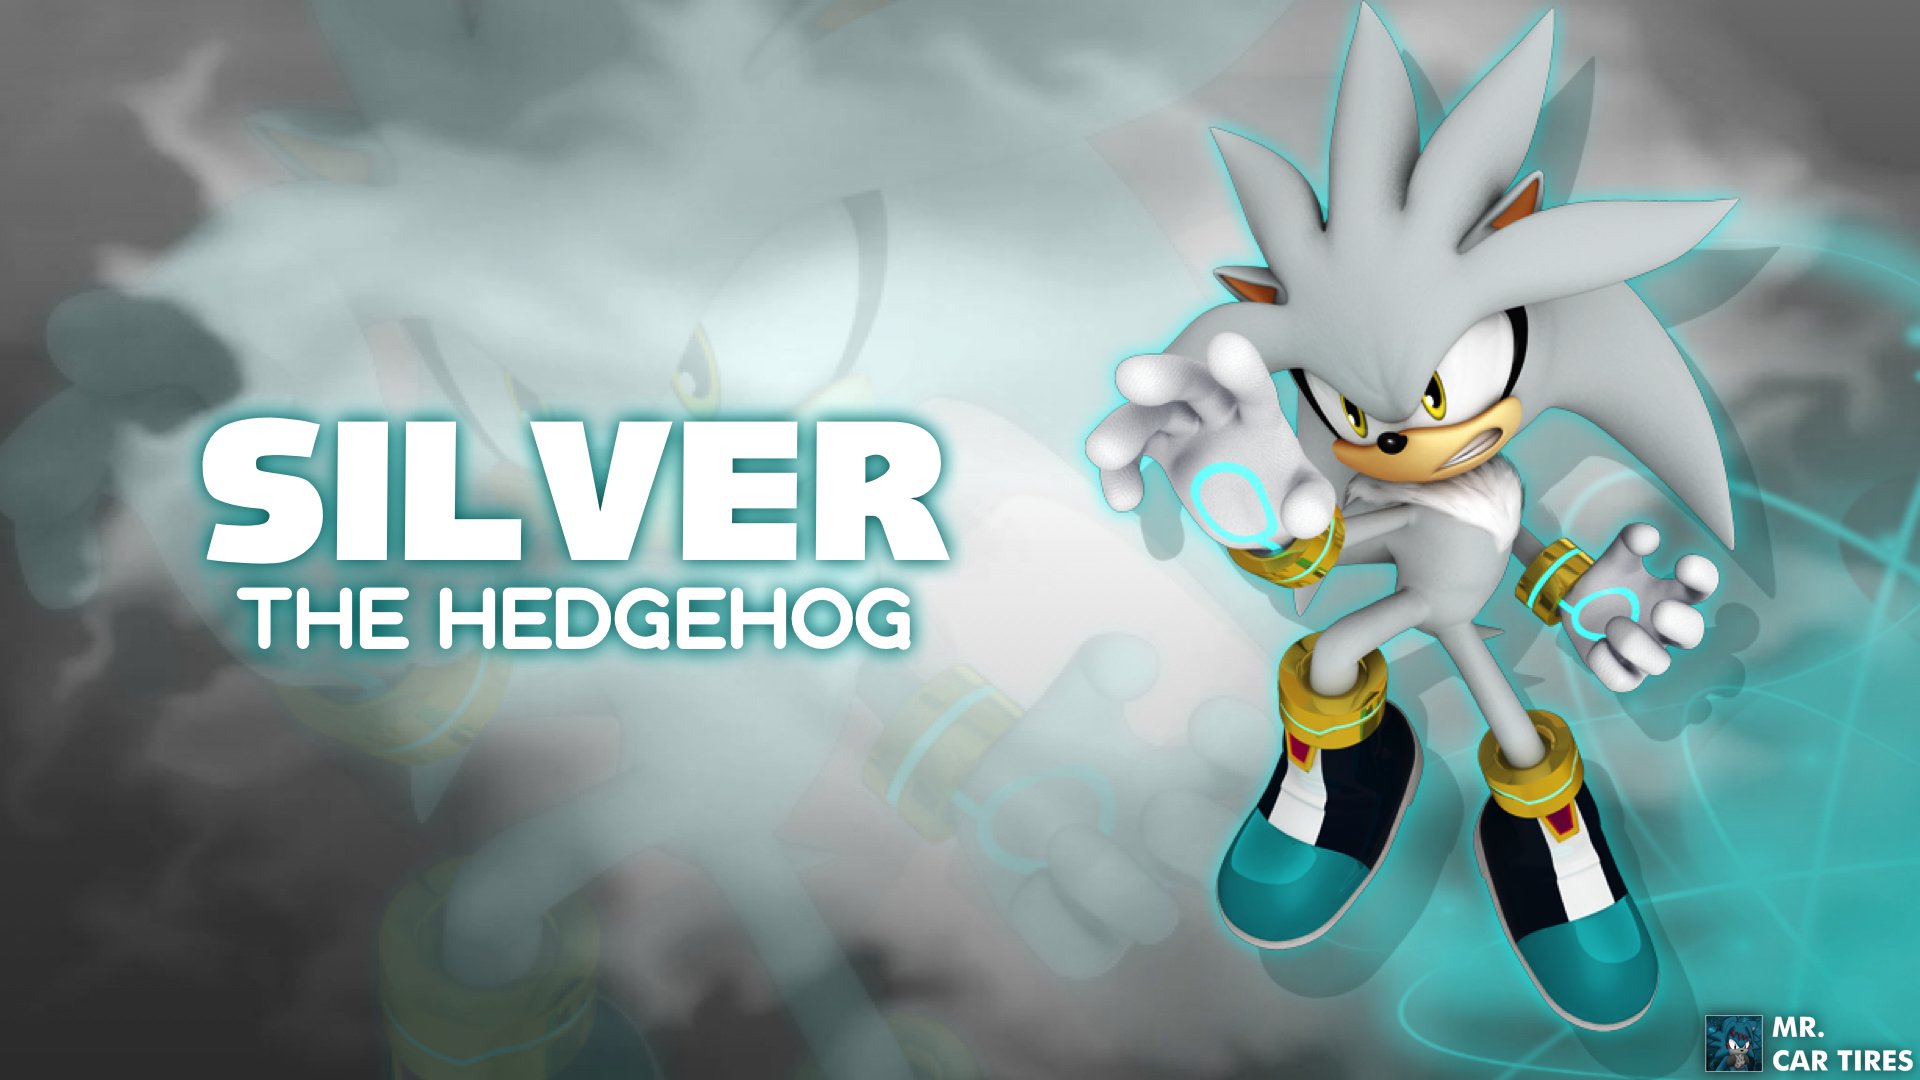 silver the hedgehog wallpaper,cartoon,fictional character,animation,games,font